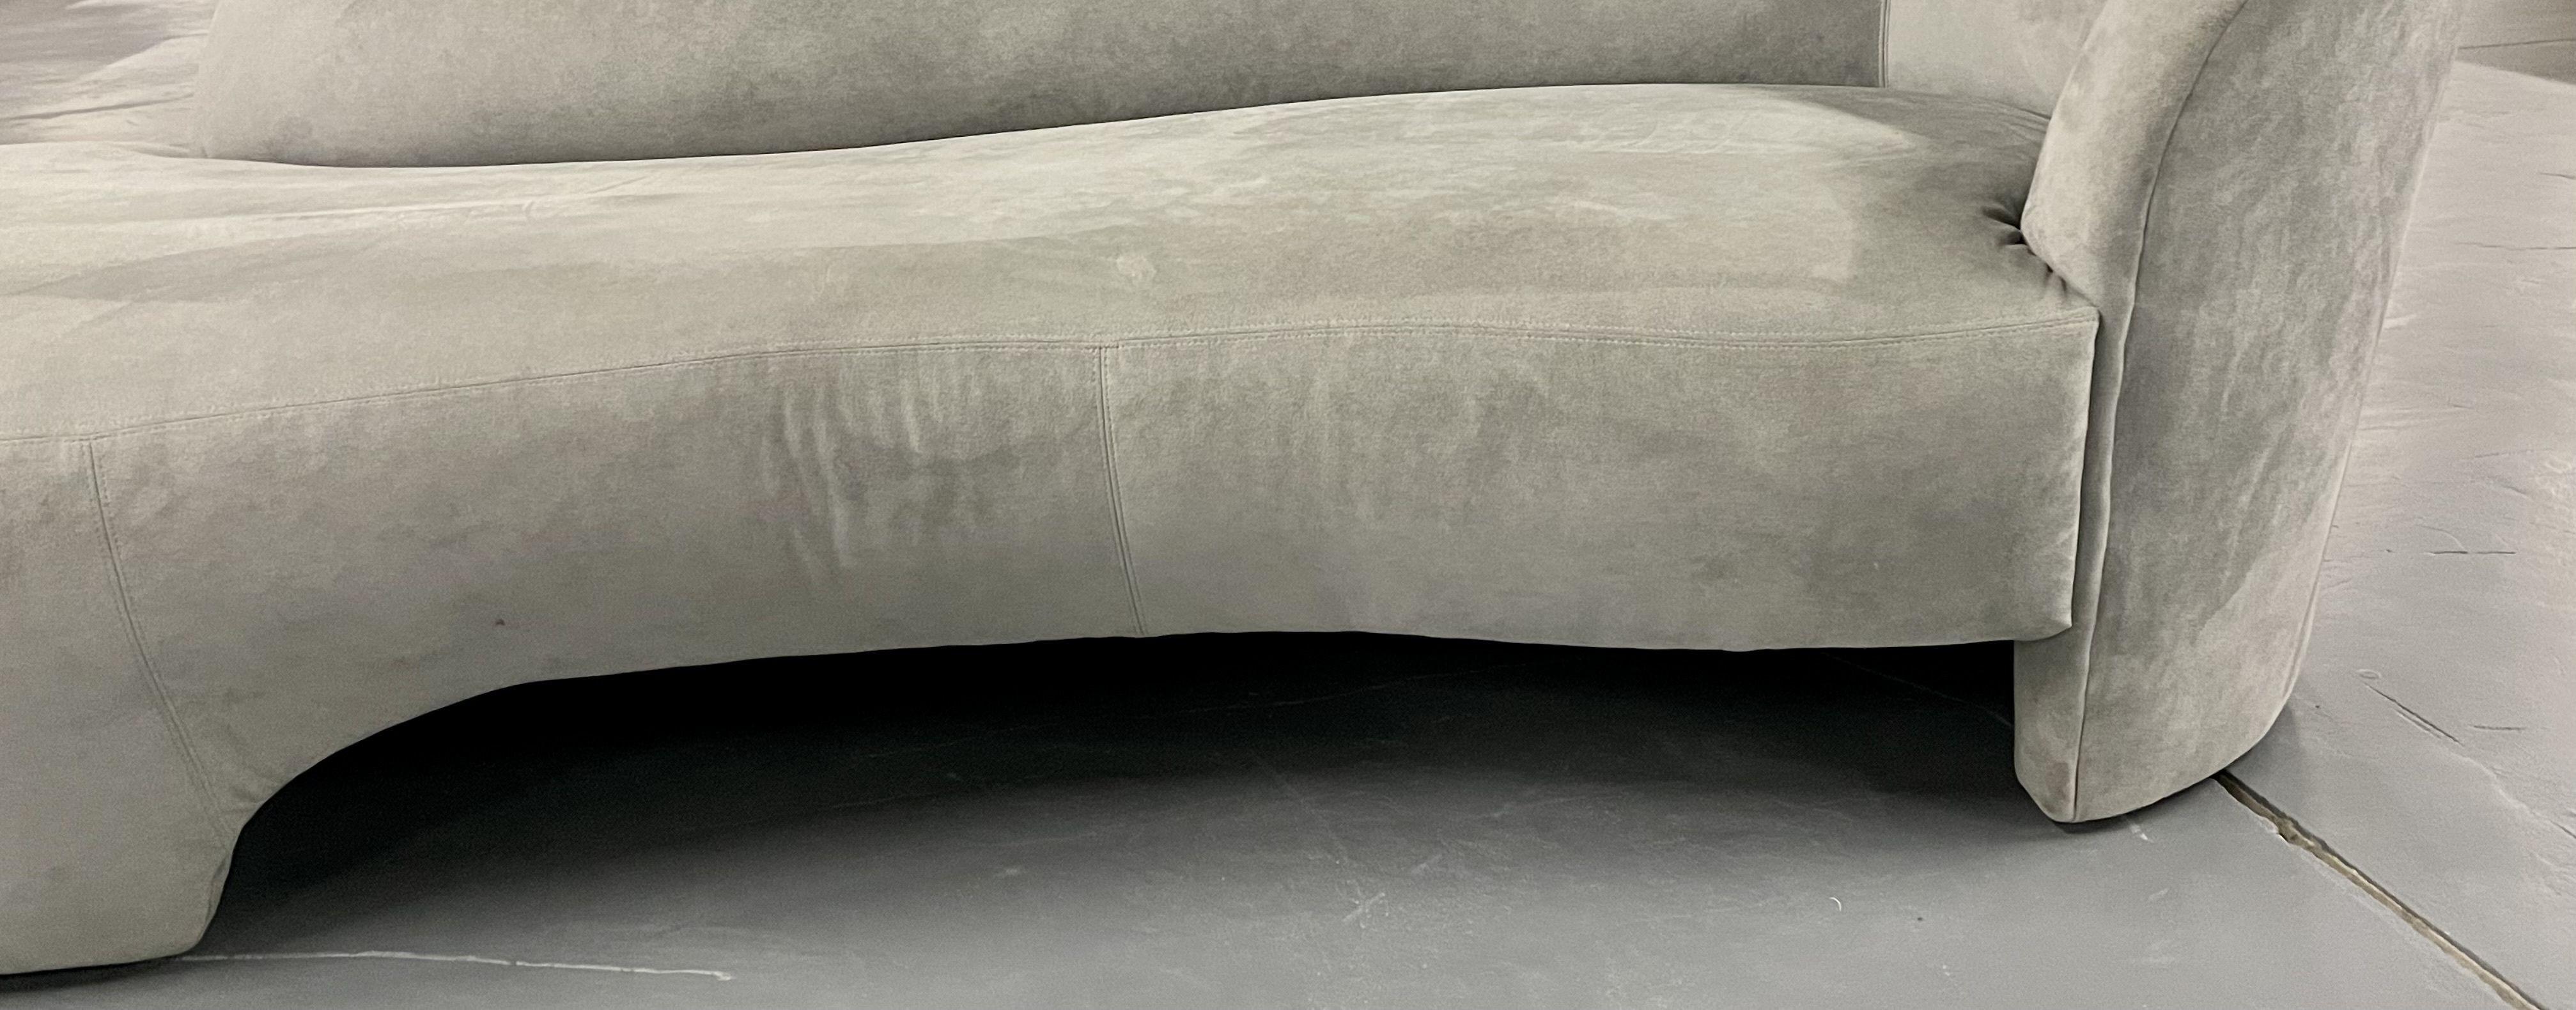 Textile Mid-Century Weiman for Preview Cloud Sofa, Grey Suede, Kidney Shape